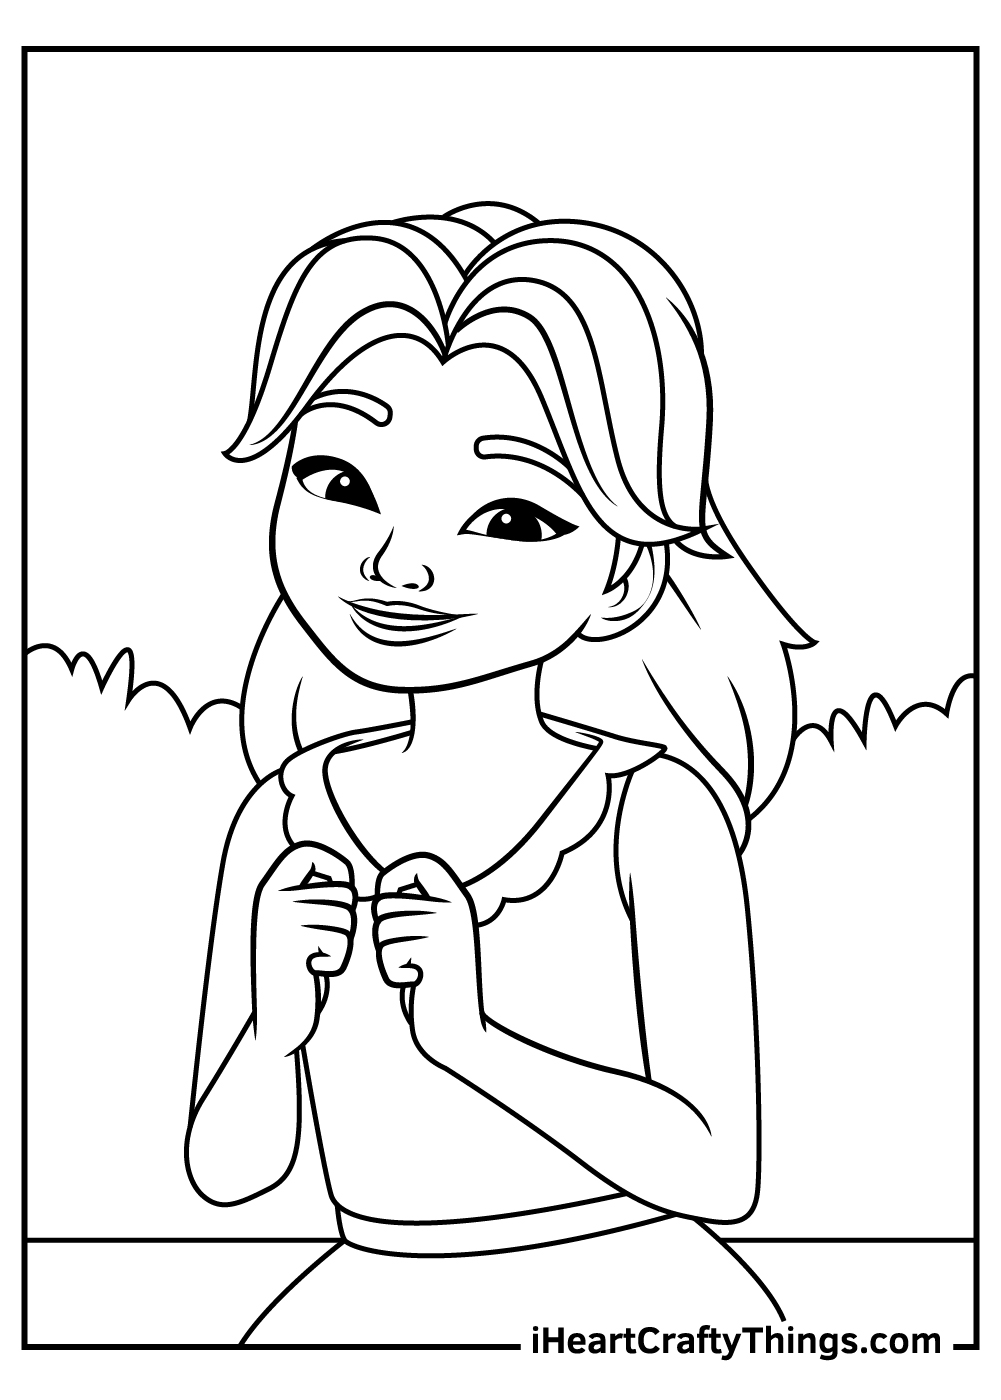 emma lego friends coloring pages free printables